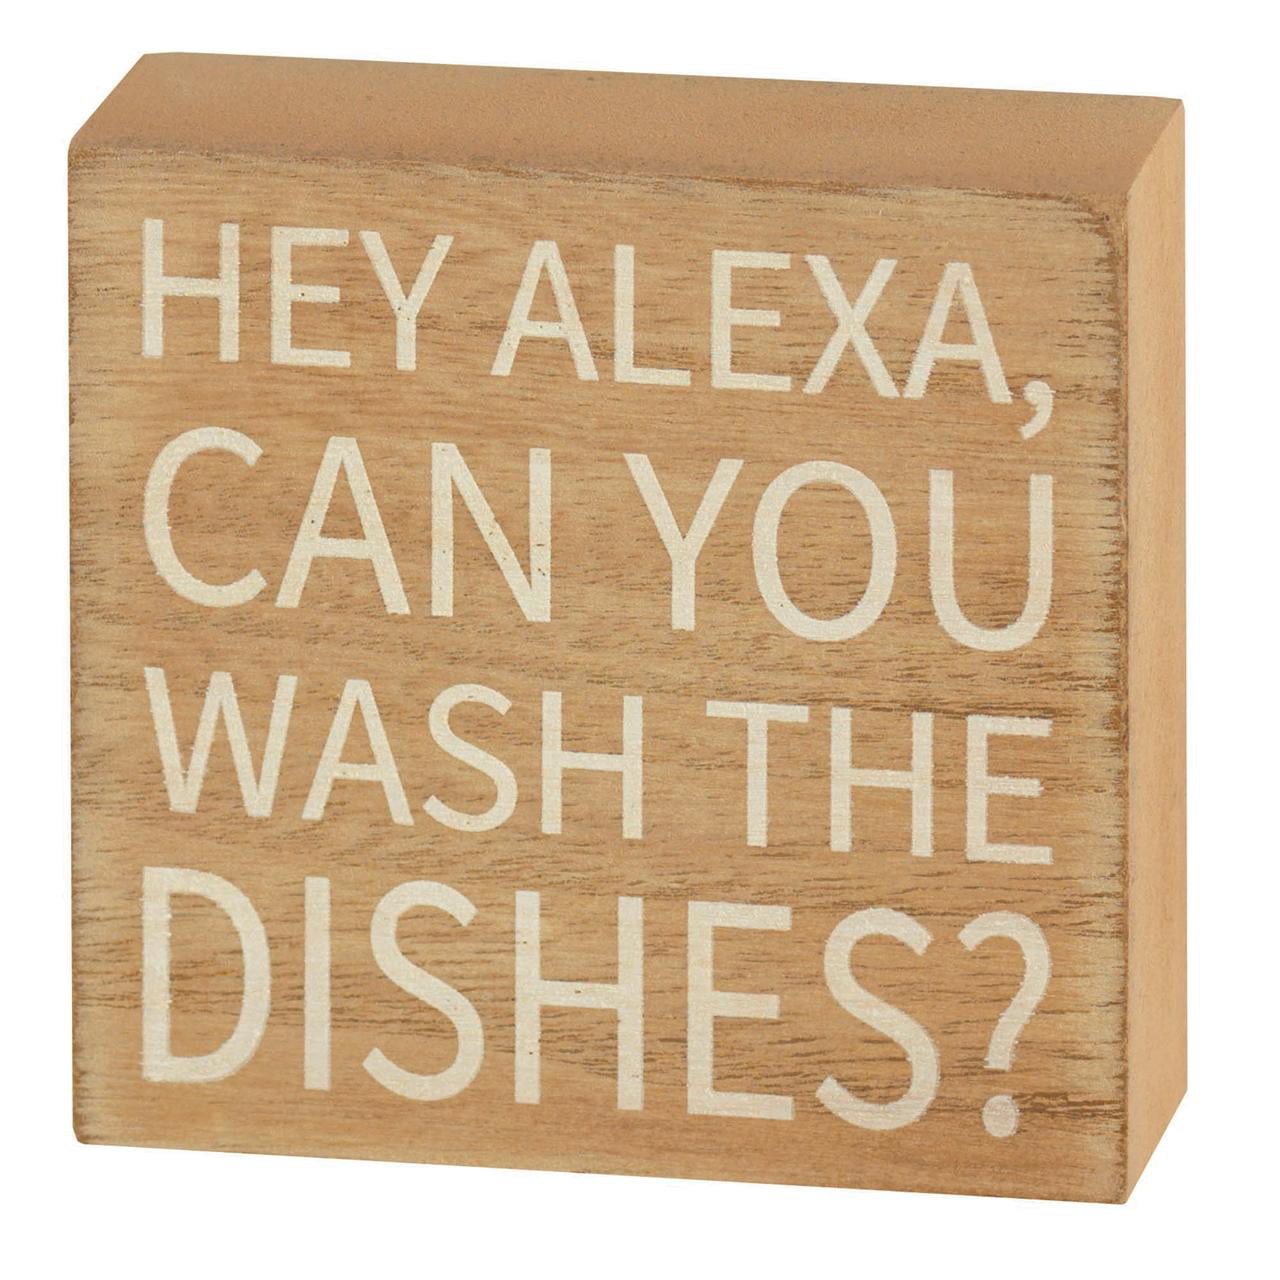 Hey Alexa Can You Wash The Dishes Brown 3 x 3 MDF Decorative Tabletop Plaque Sign 